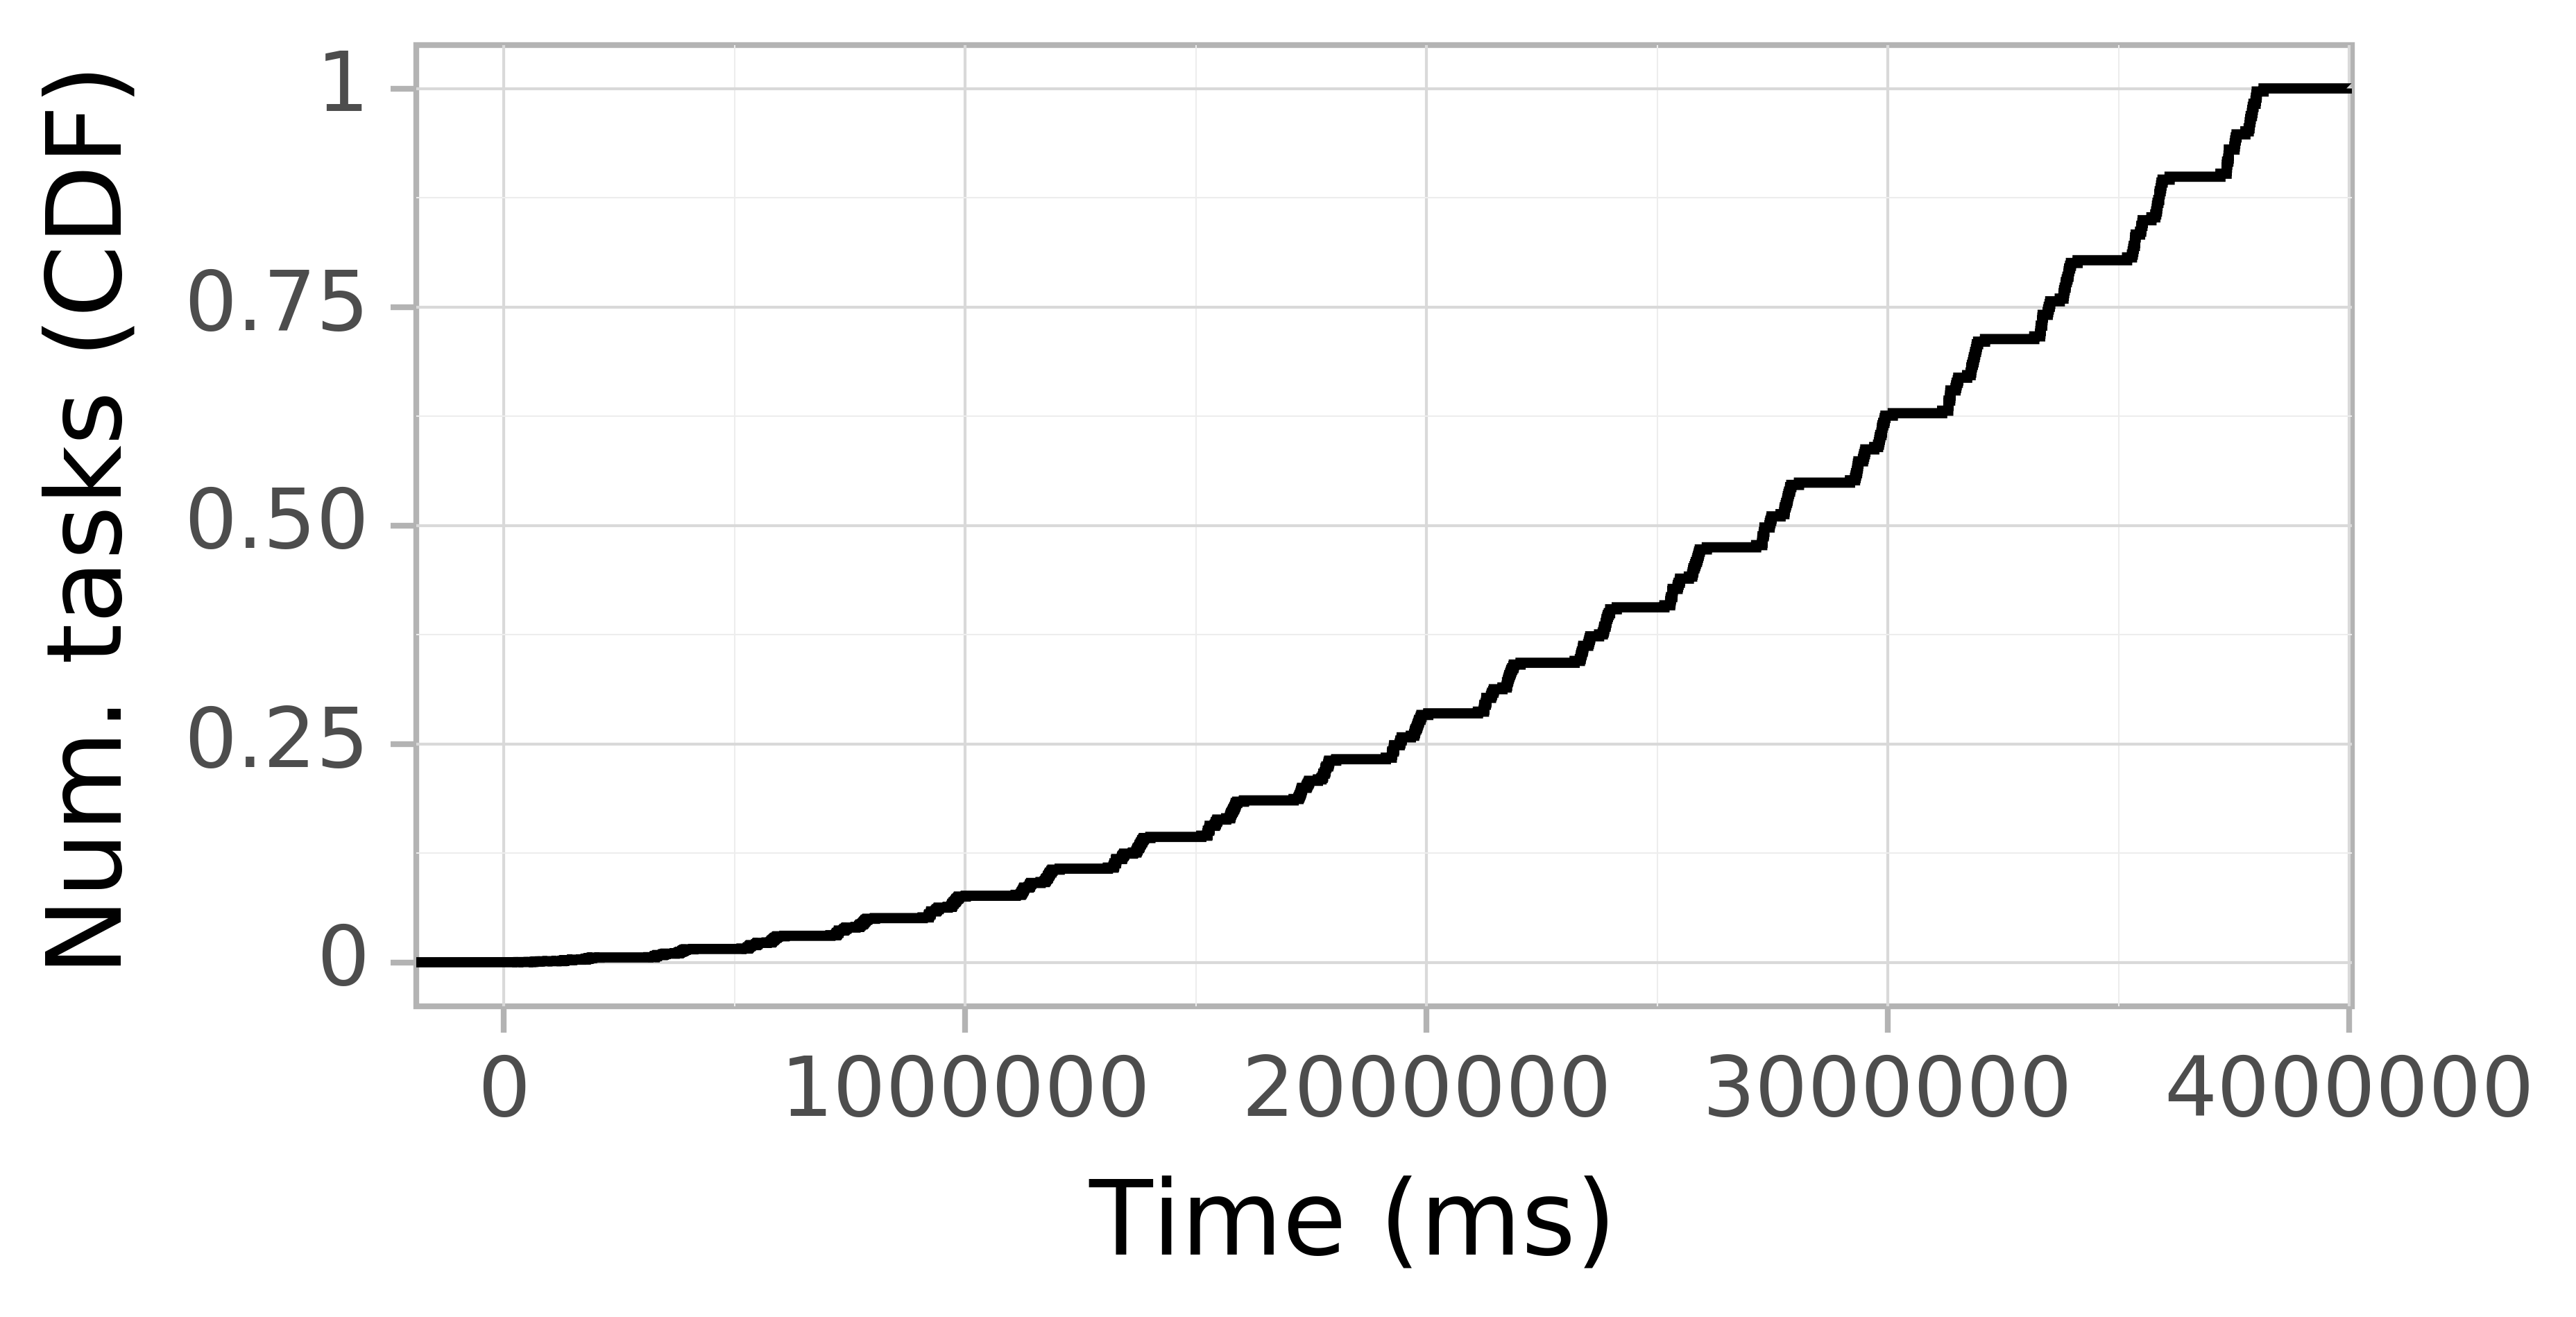 Task arrival CDF graph for the askalon-new_ee10 trace.